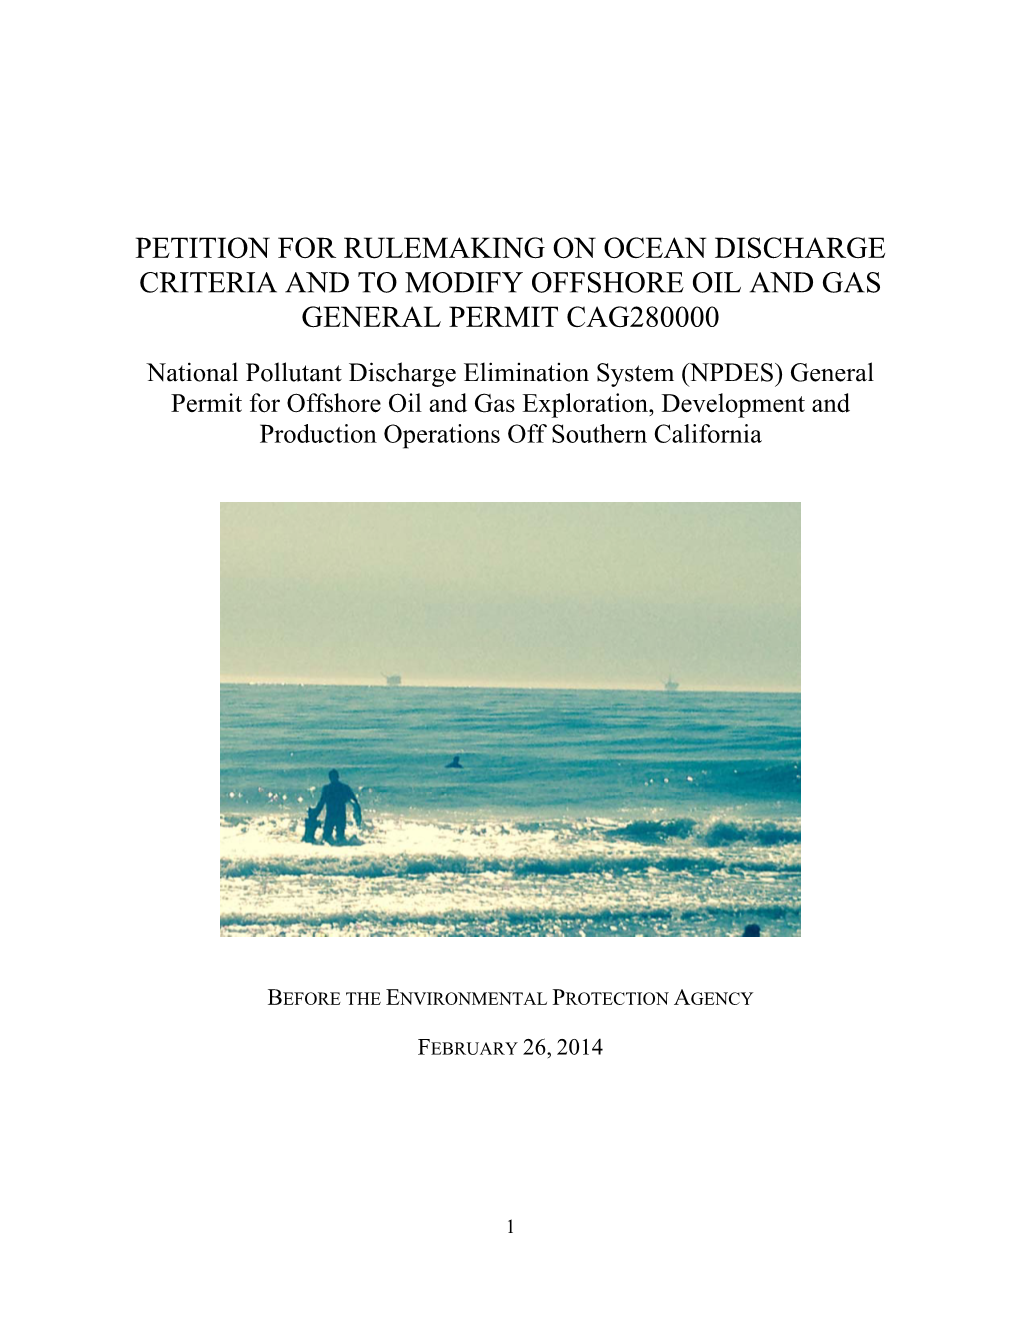 Petition to Modify General Permit for California Offshore Oil And